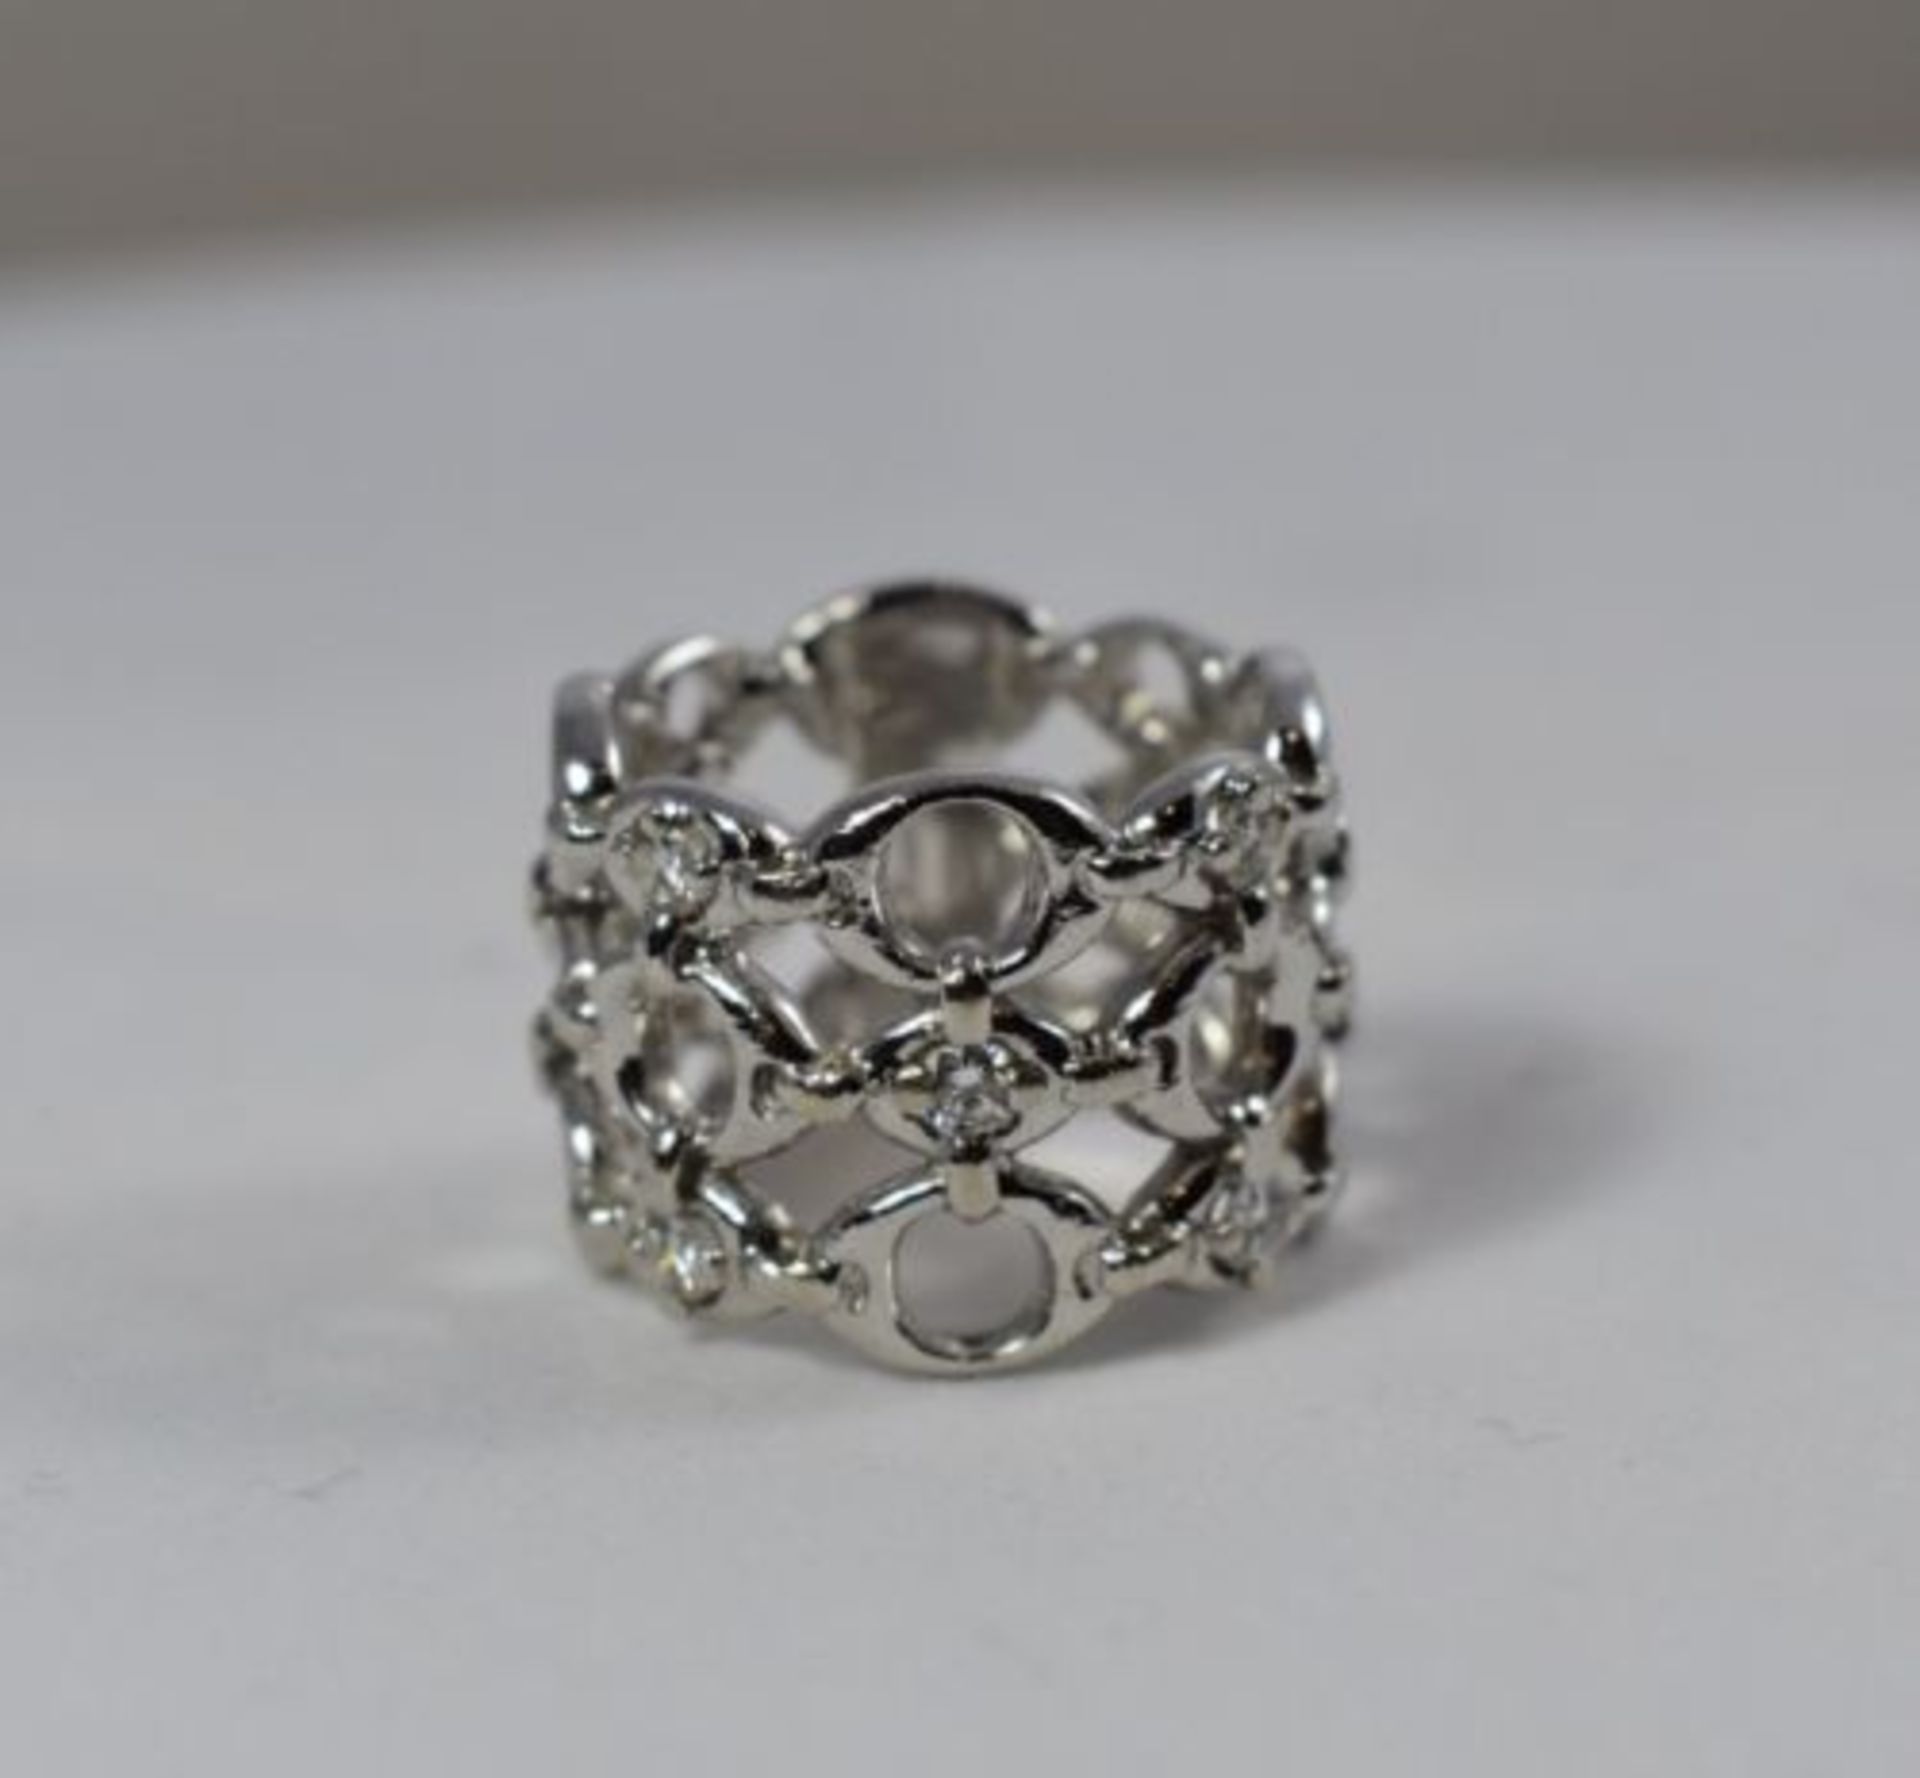 Christian Dior Diamond Ring set in 18 ct White Gold - Image 6 of 12